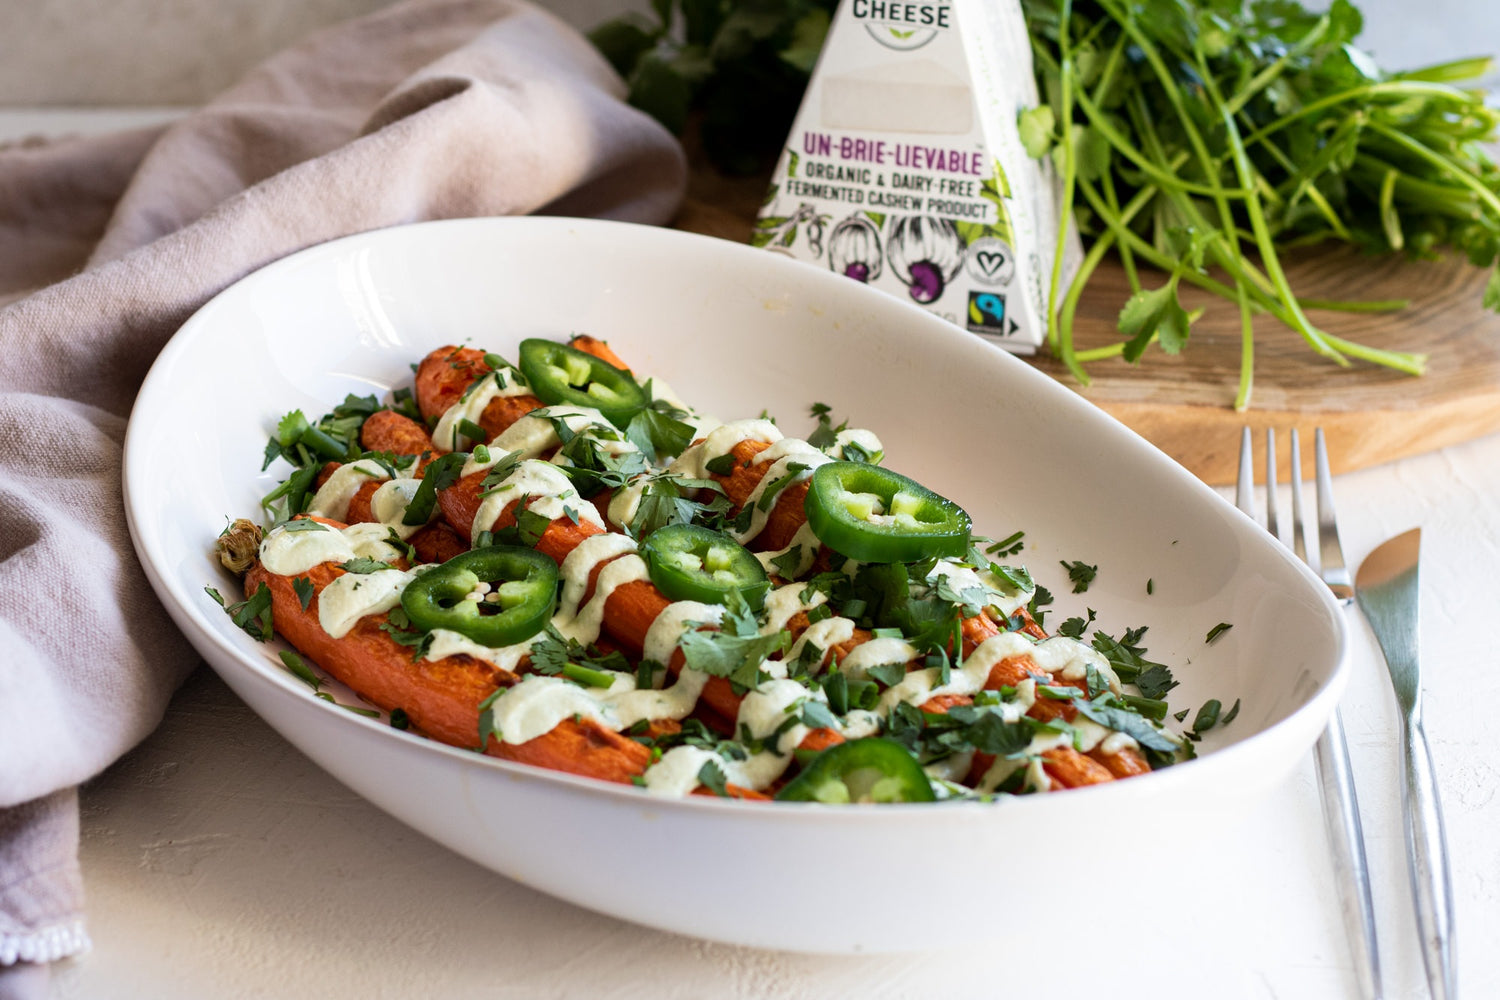 Large serving bowl filled with roasted carrots, topped with a dairy-free cheese sauce, sliced jalapenos, and fresh cilantro. Served next to a box of dairy-free brie cheese and bunch of fresh cilantro.